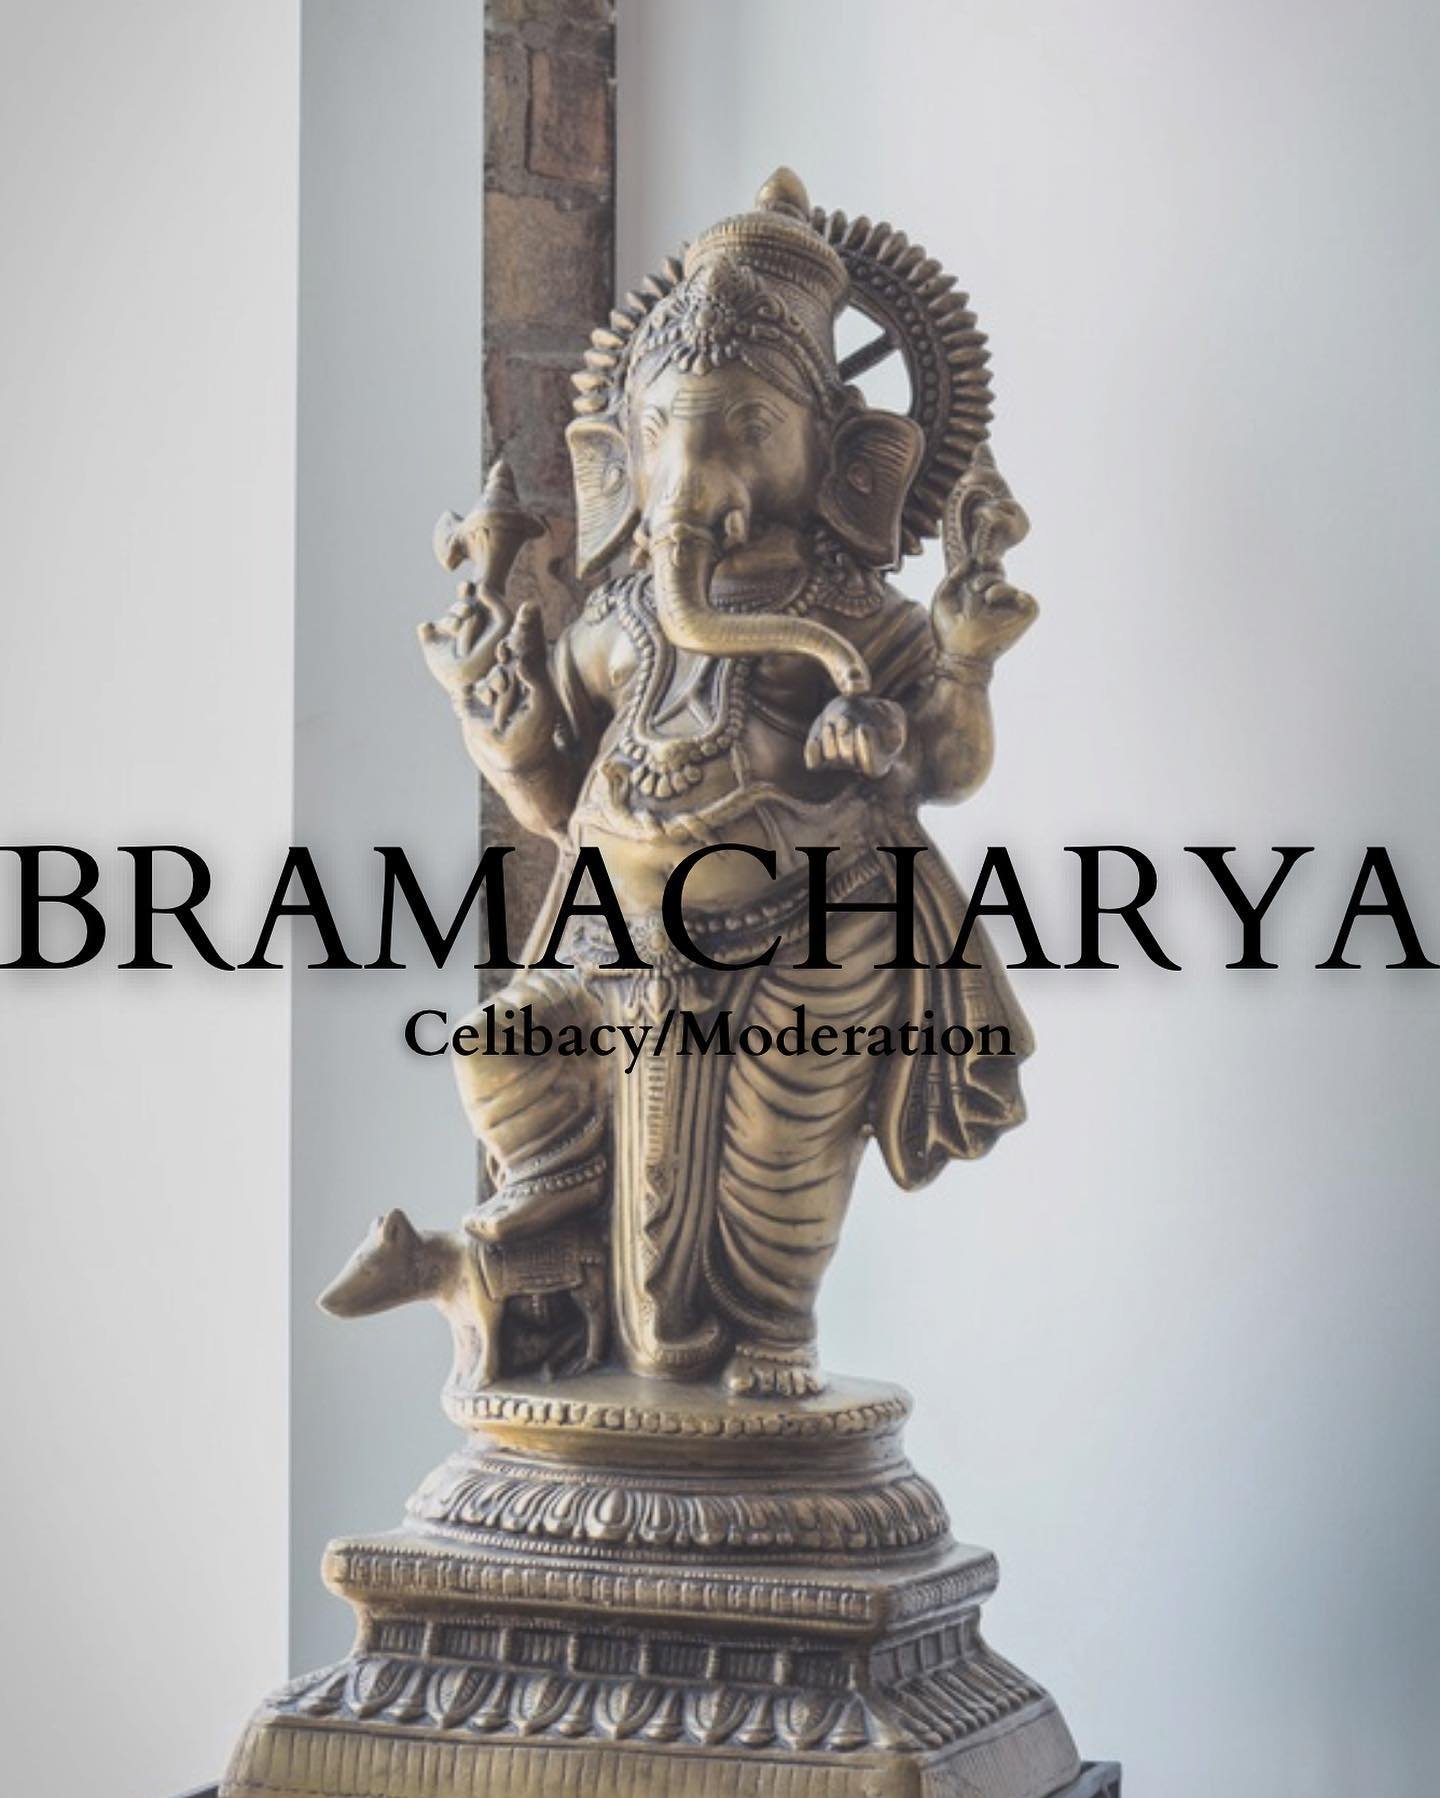 The 4th Yama is Bramacharya. 

Bramacharya in the most traditional sense is celibacy. However, when viewing the Yamas and the Niyamas through our modern lenses, we can understand it as moderation or self-restraint. 

Many will still take this Yama in